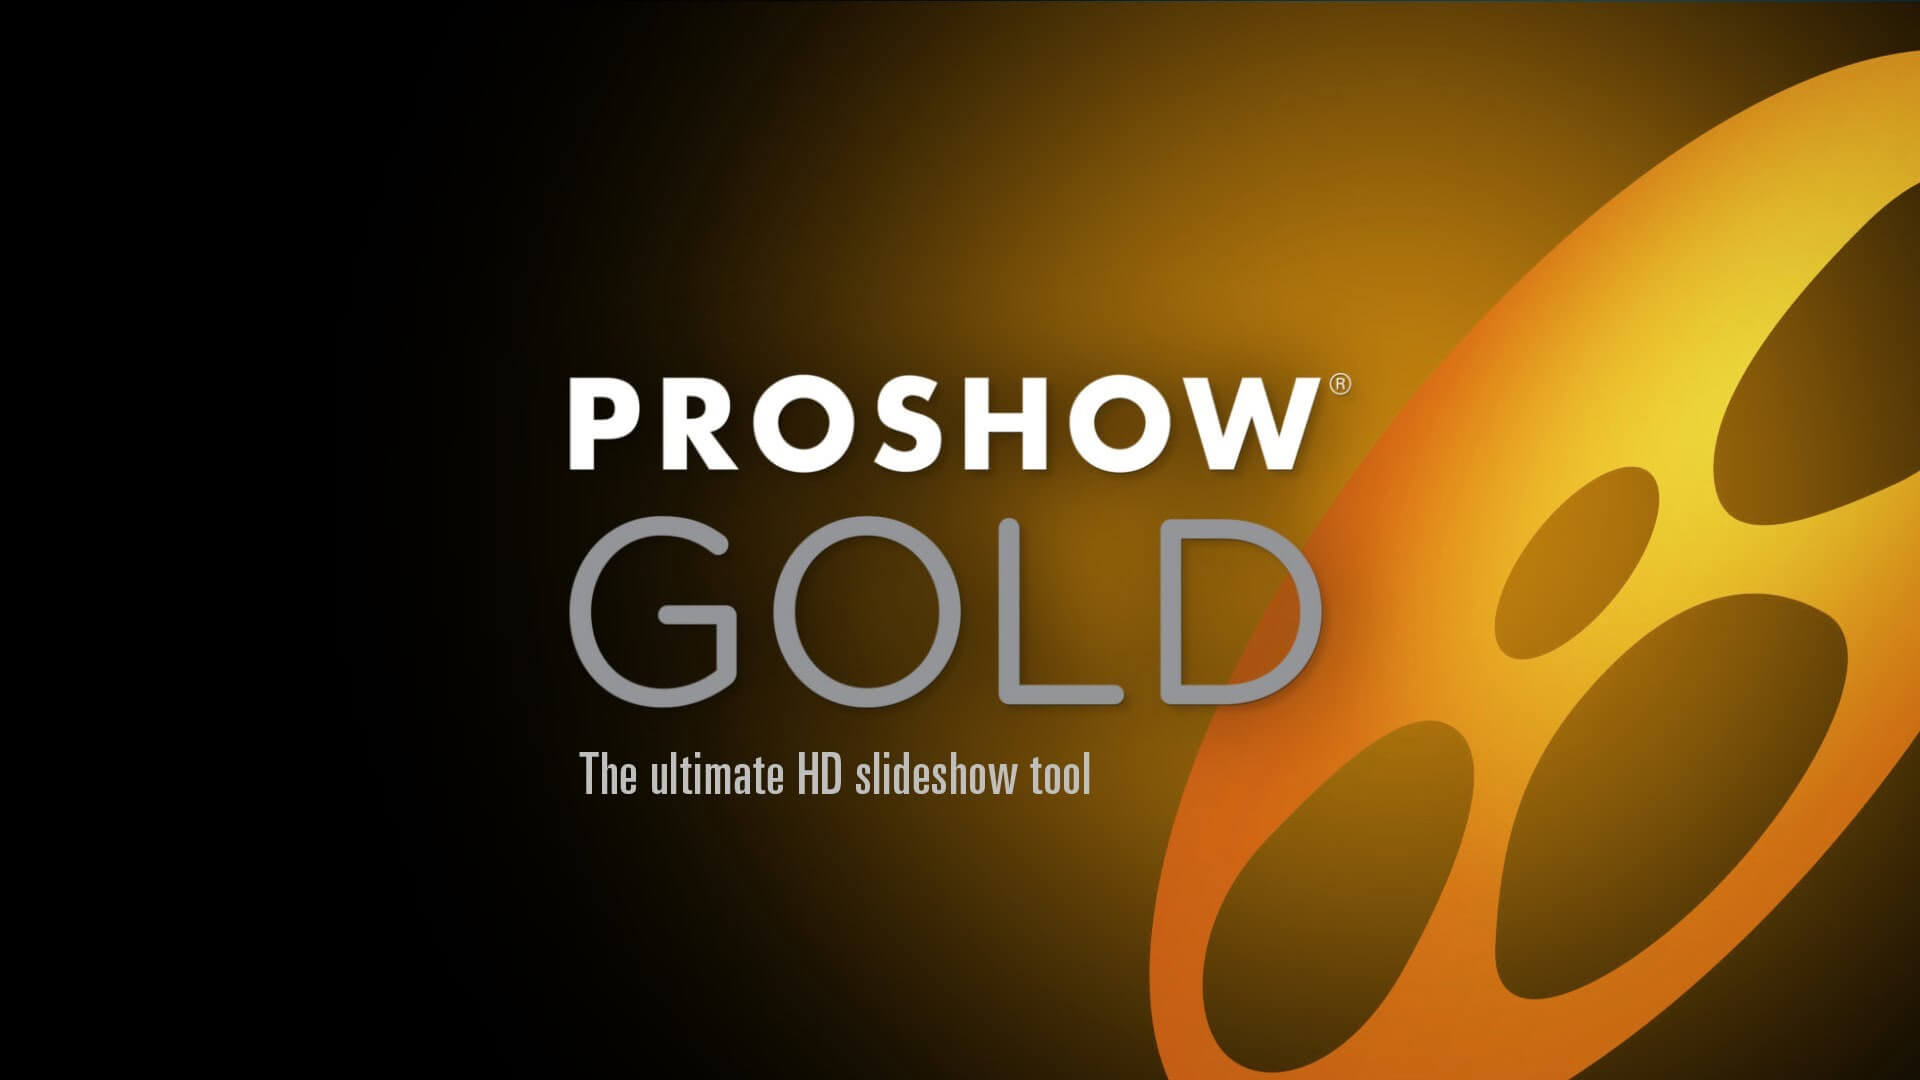 proshow gold software free download full version with crack